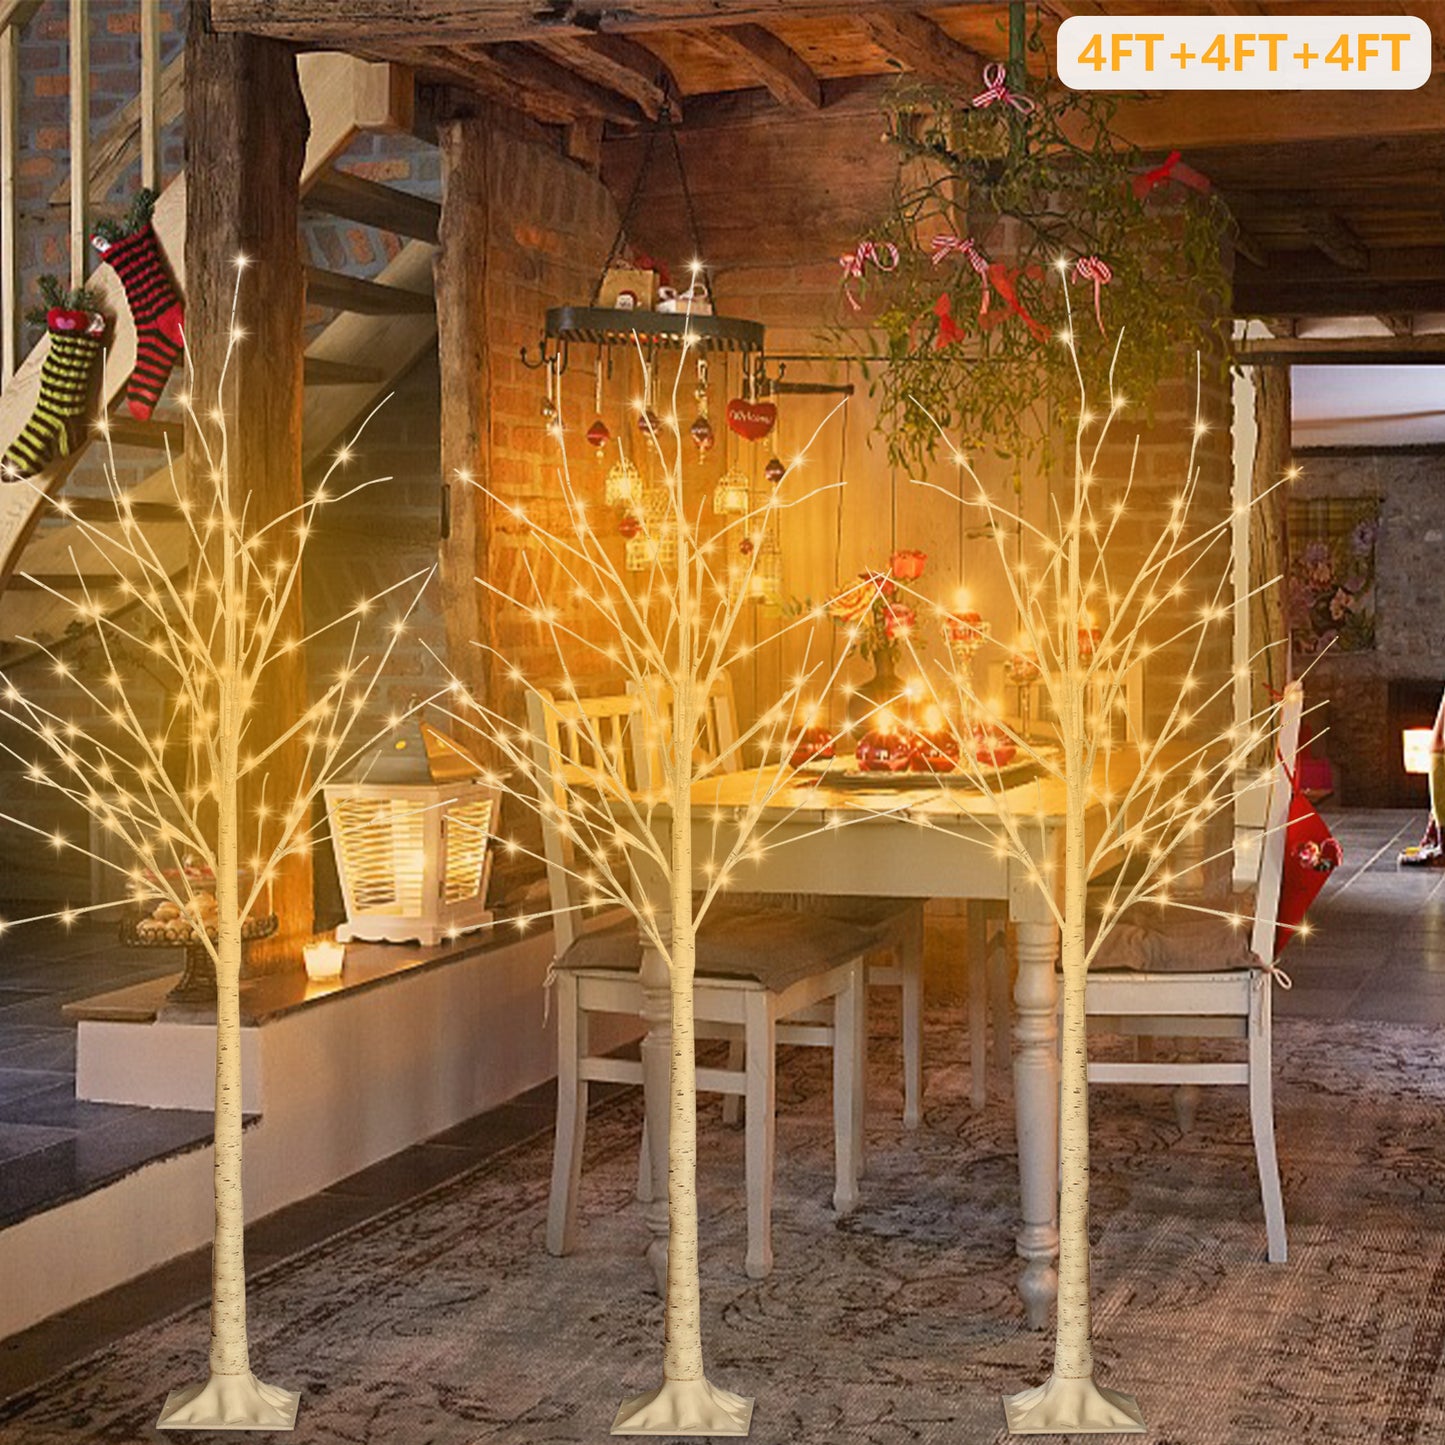 White Birch Christmas Trees Set of 3, SYNGAR 4ft/4ft/4ft Christmas Tree with Warm White LED Lights, for Christmas Decoration, Christmas Ornaments Trees for Indoor Outdoor Festival Party, D4016